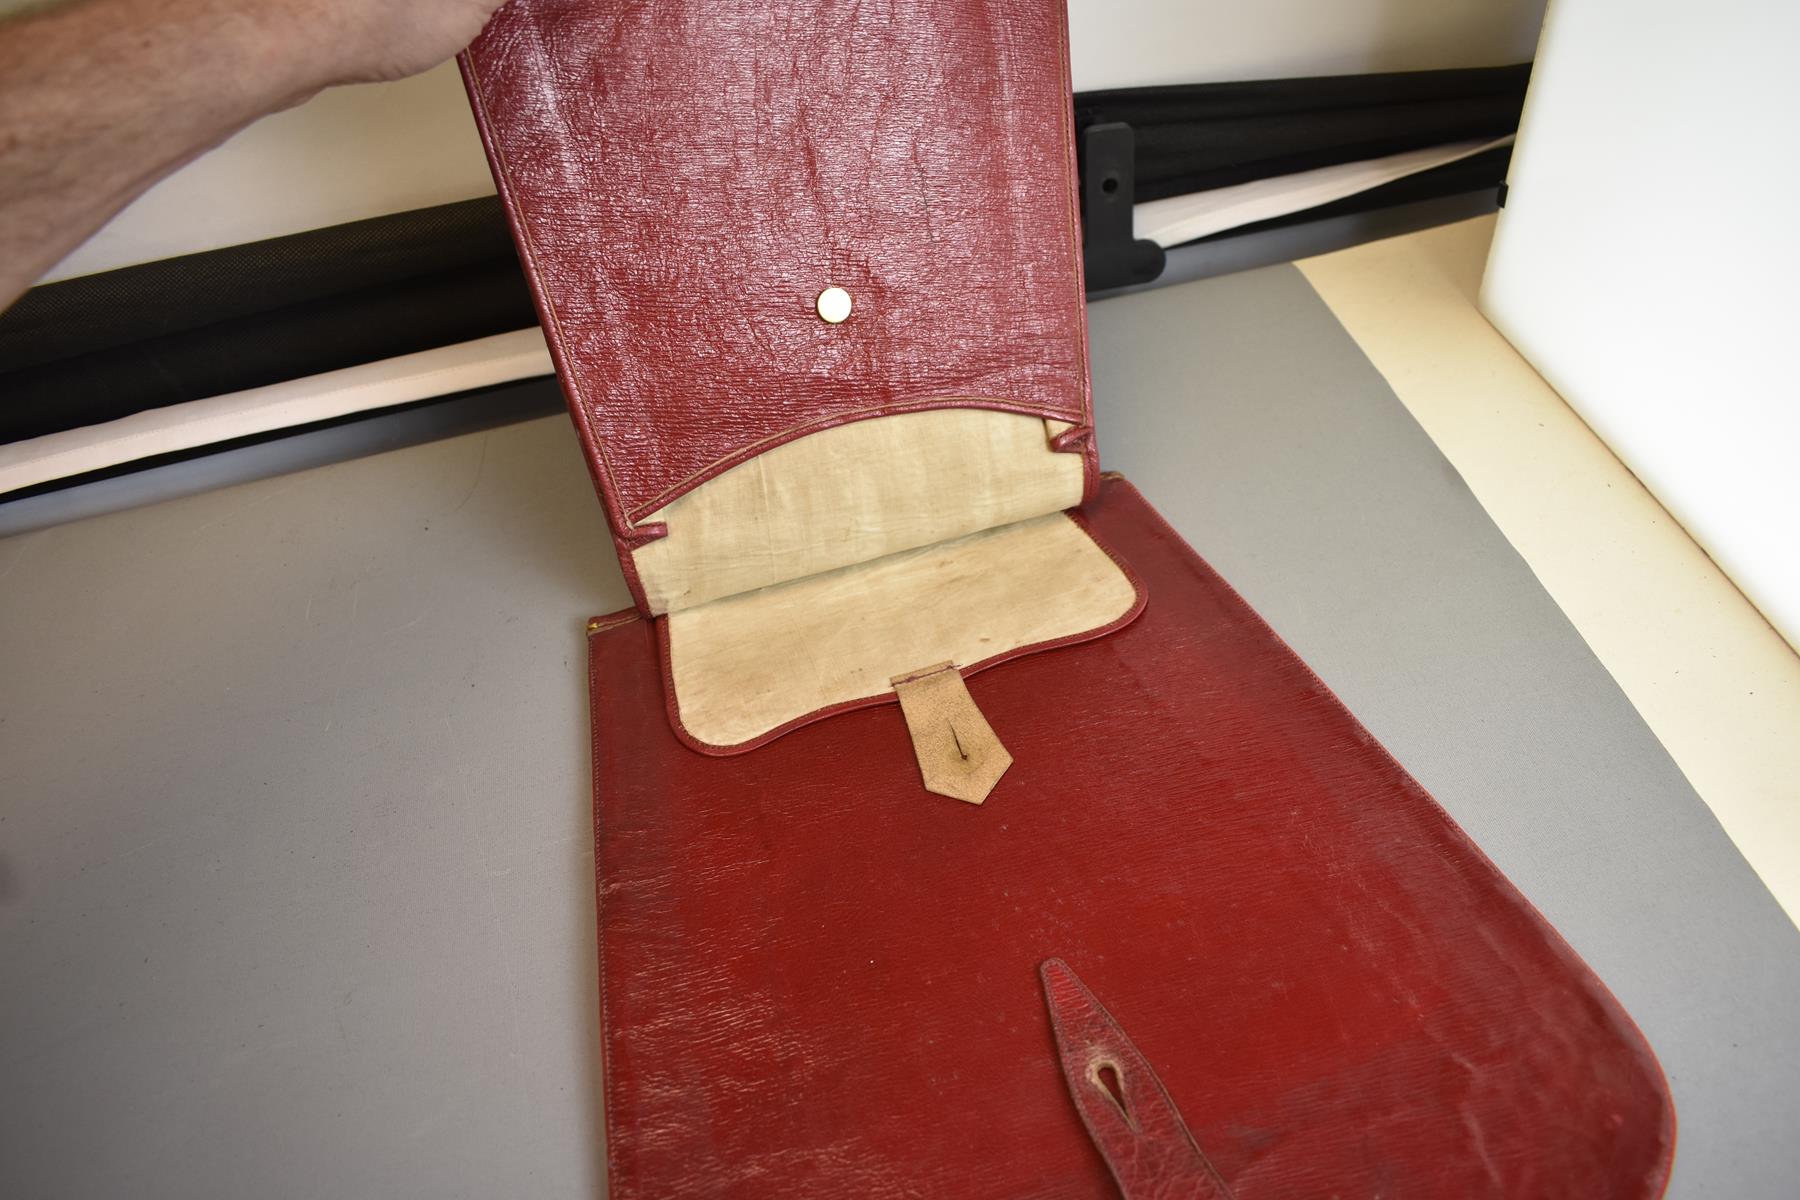 A FINE LARGE SIZE WILLIAM IV 15TH KING'S HUSSARS OFFICER'S SABRETACHE, the red felt flap with - Image 9 of 10